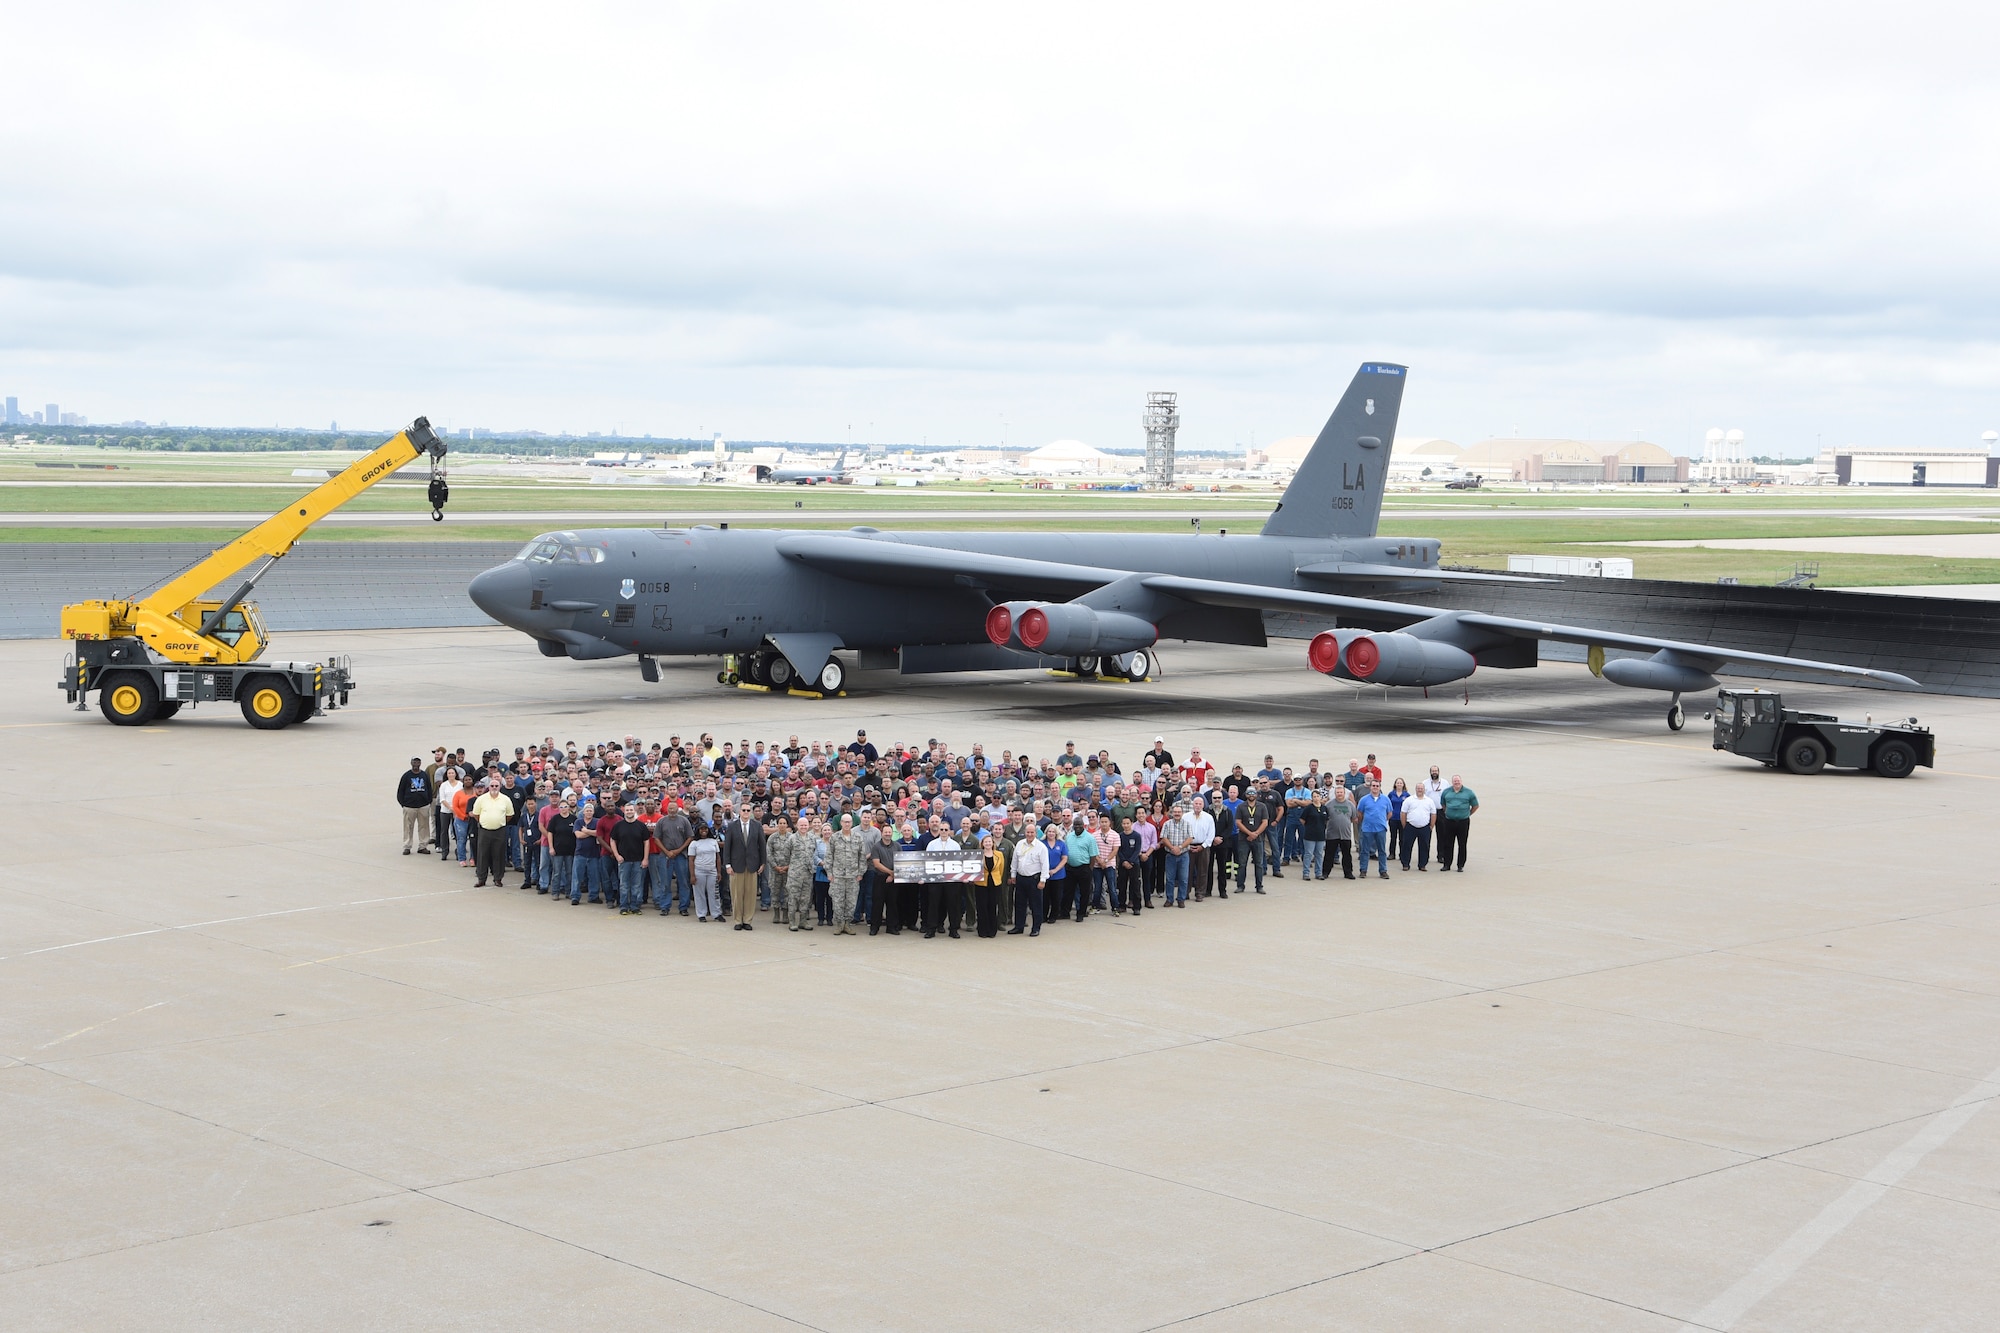 Personnel from the 565th Aircraft Maintenance Squadron, Oklahoma City Air Logistics Complex, gather for a group photo in front of B-52H Stratofortress 60-0058 on Sept. 24 at Tinker Air Force Base. 60-0058 completed overhaul here almost two weeks ahead of schedule on Sept. 14th and is the 17th aircraft produced in fiscal year 2018 meeting the programmed goal of 17 aircraft. The aircraft was delivered to the 2nd Bomb Wing, Barksdale Air Force Base on Sept. 25, 2018. Also shown are major pieces of ground support equipment used during the overhaul process. (U.S. Air Force photo/Greg L. Davis)